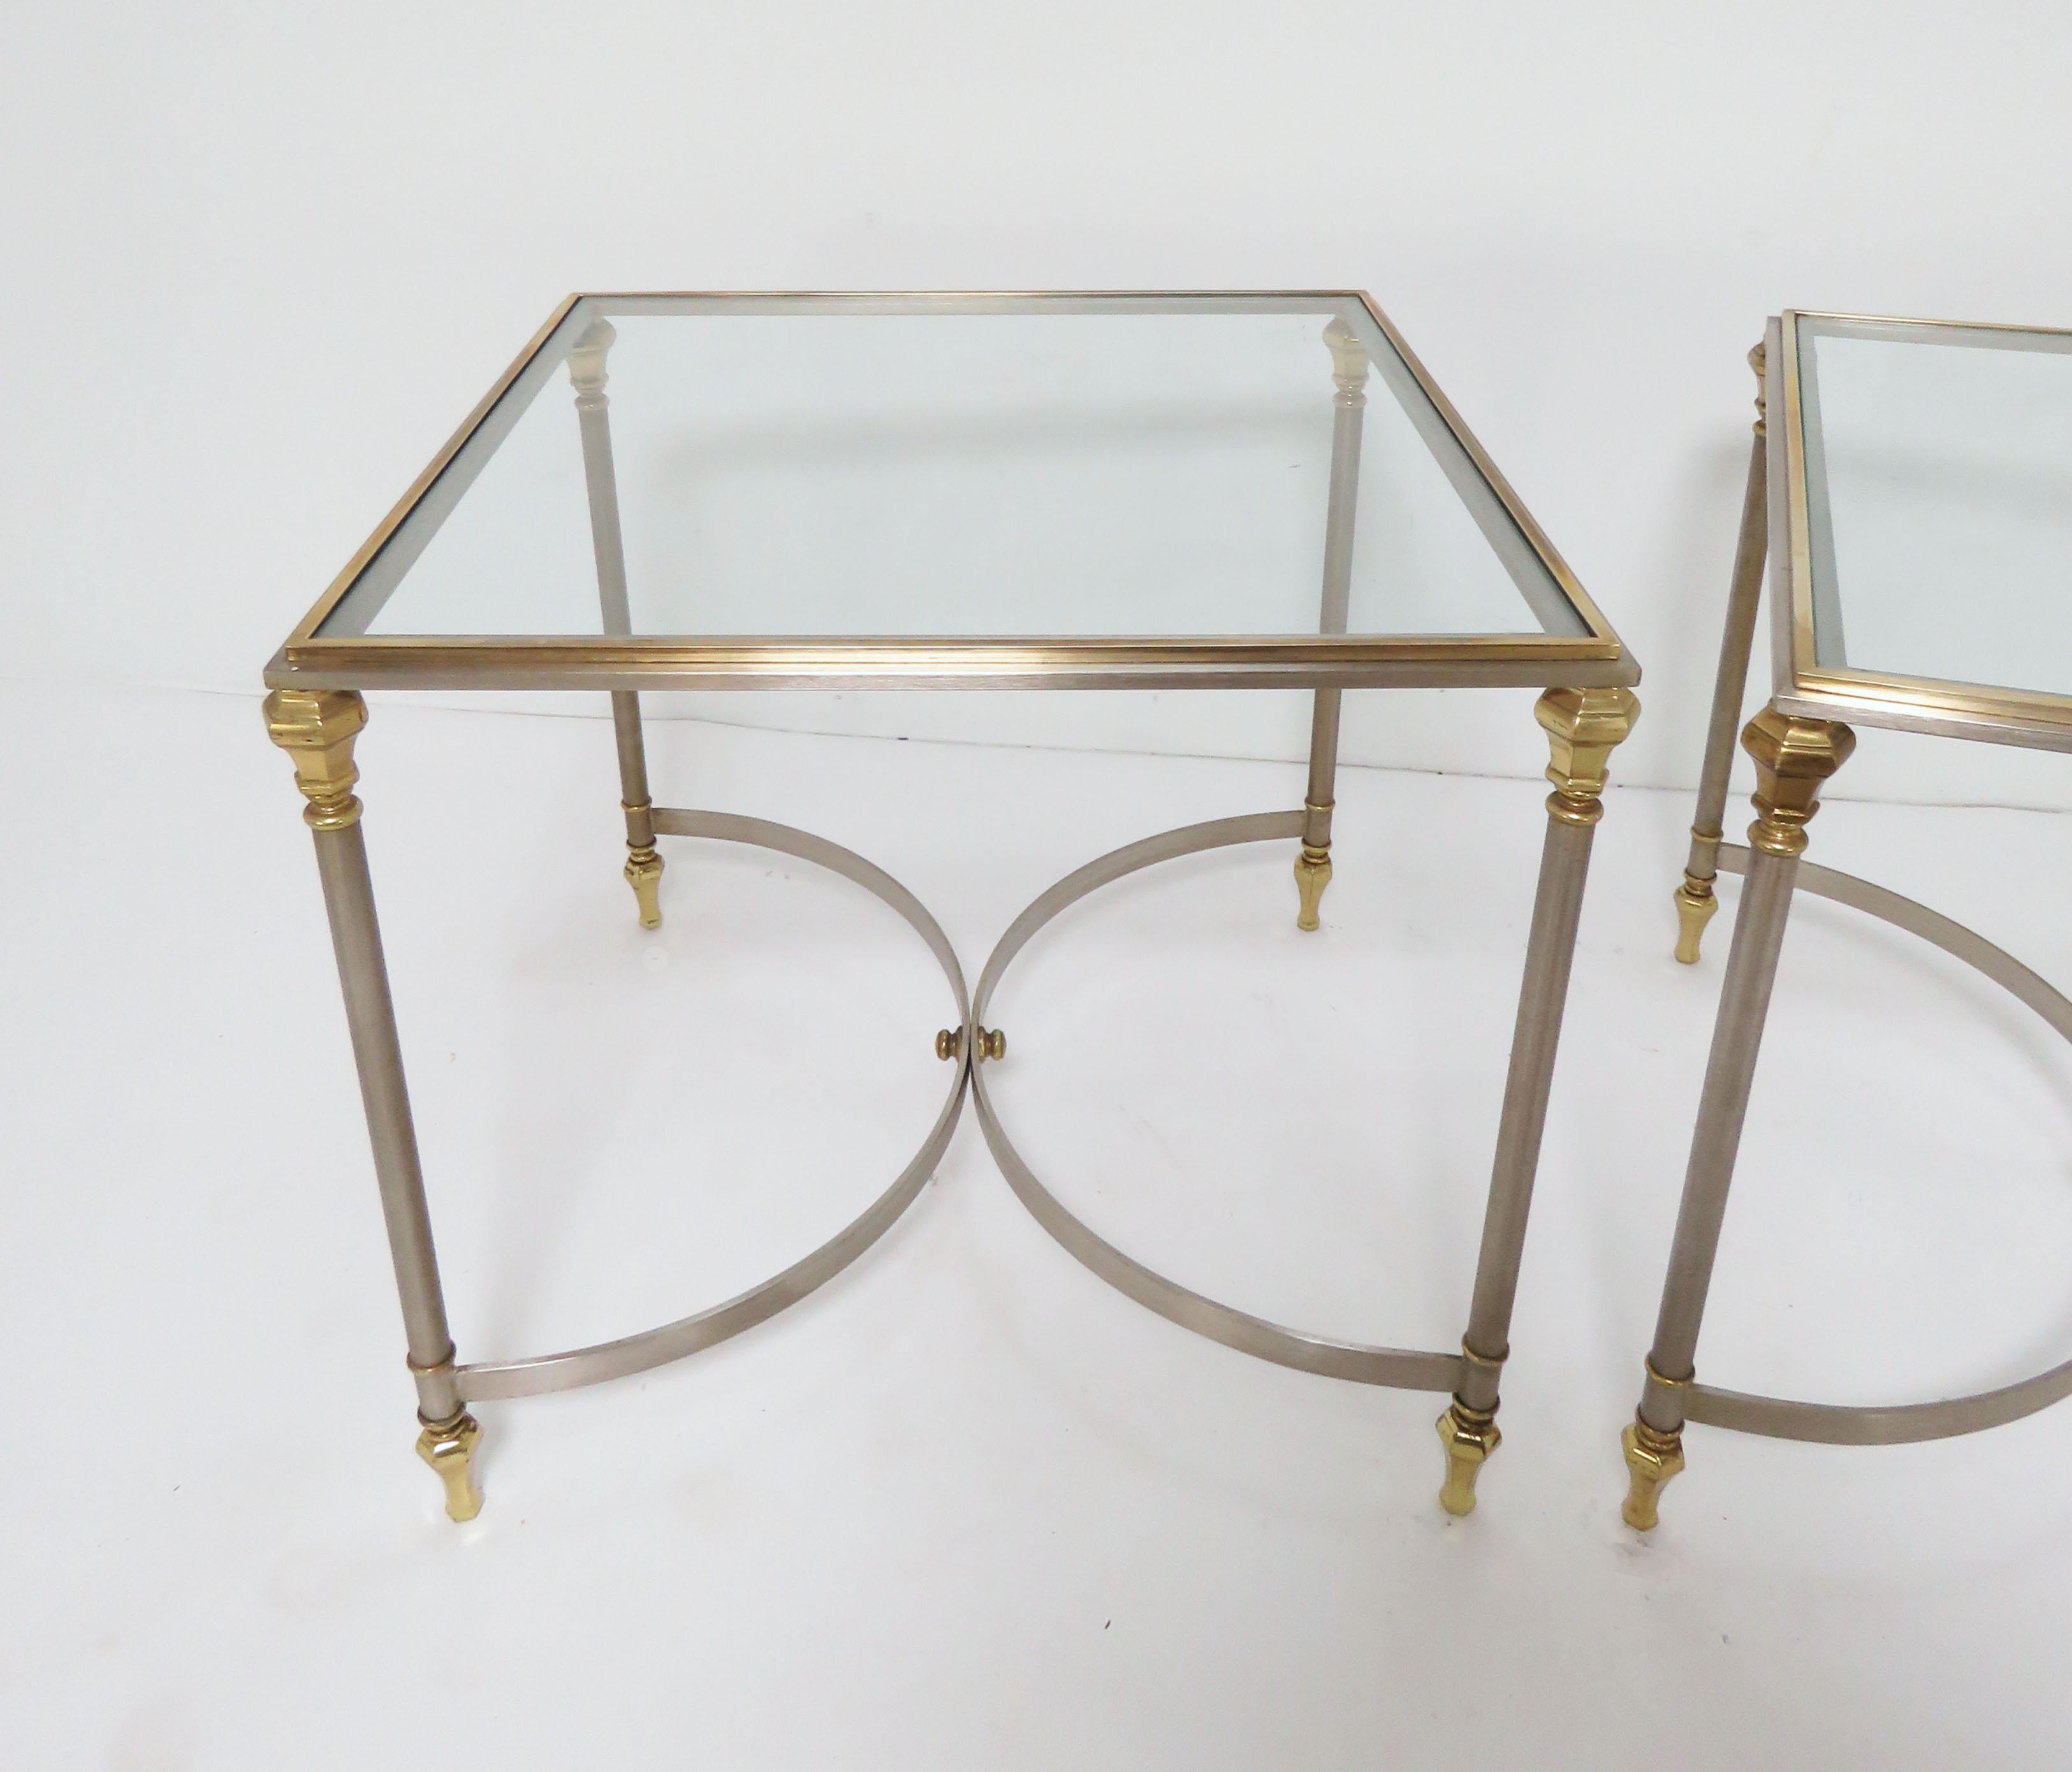 Pair of mixed metal (brushed steel and brass) side tables in the manner of Maison Jansen, made in Italy and imported to the United States by Ethan Allen in the 1960s.